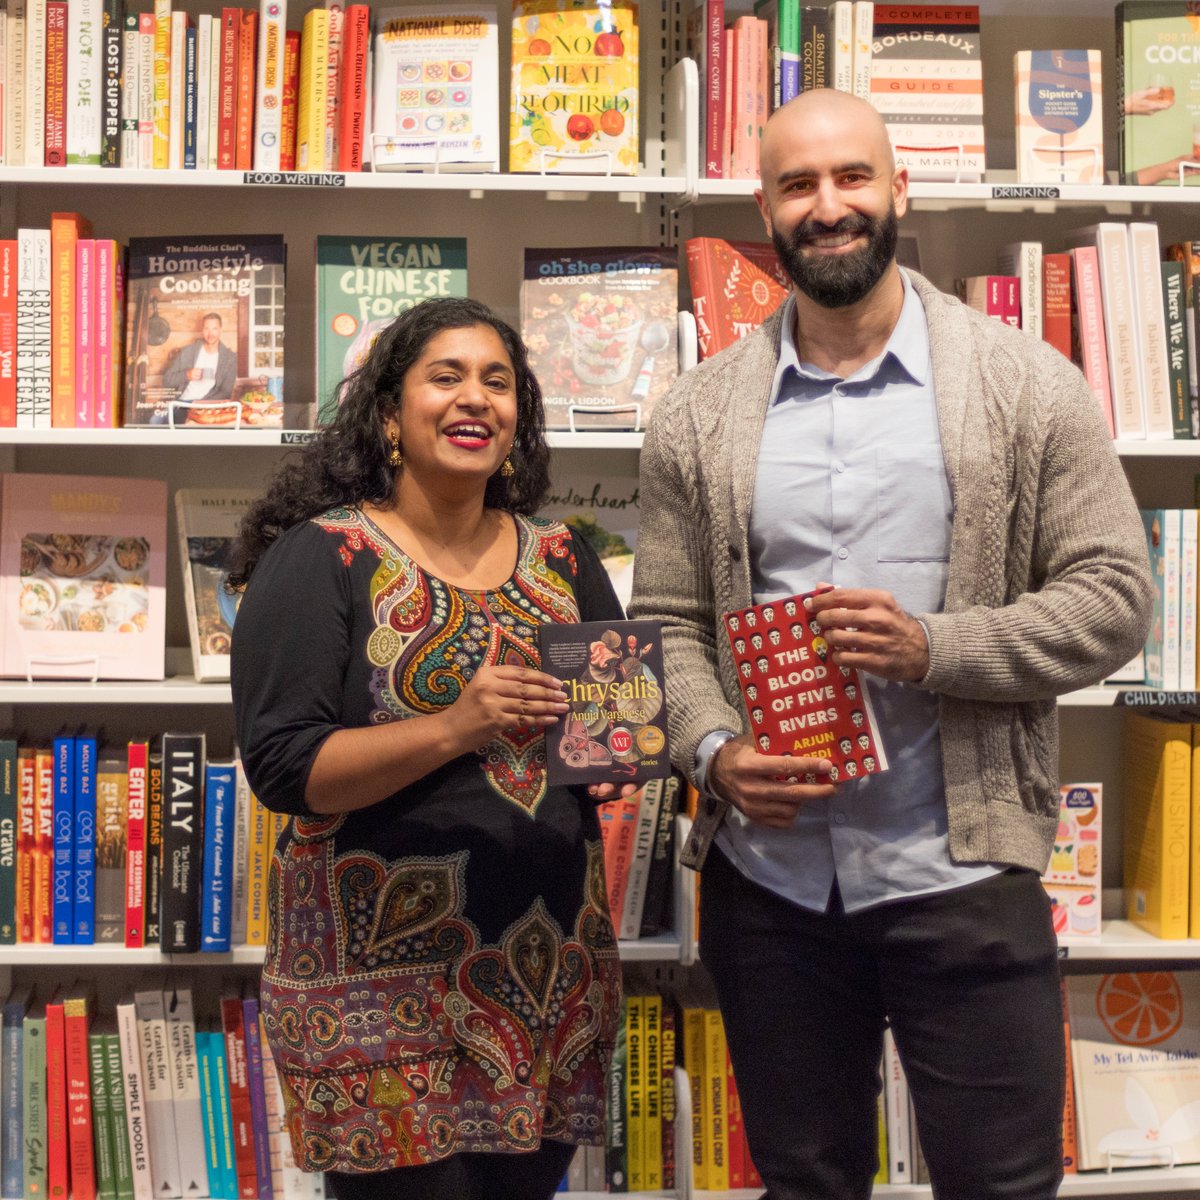 Great book launch last night @typebooks to celebrate the launch of Arjun Bedi's debut novel, The Blood of Five Rivers, with special guest @Anuja_V, winner of the Governor General's award for fiction. @PalimpsestPress shorturl.at/cntQ3